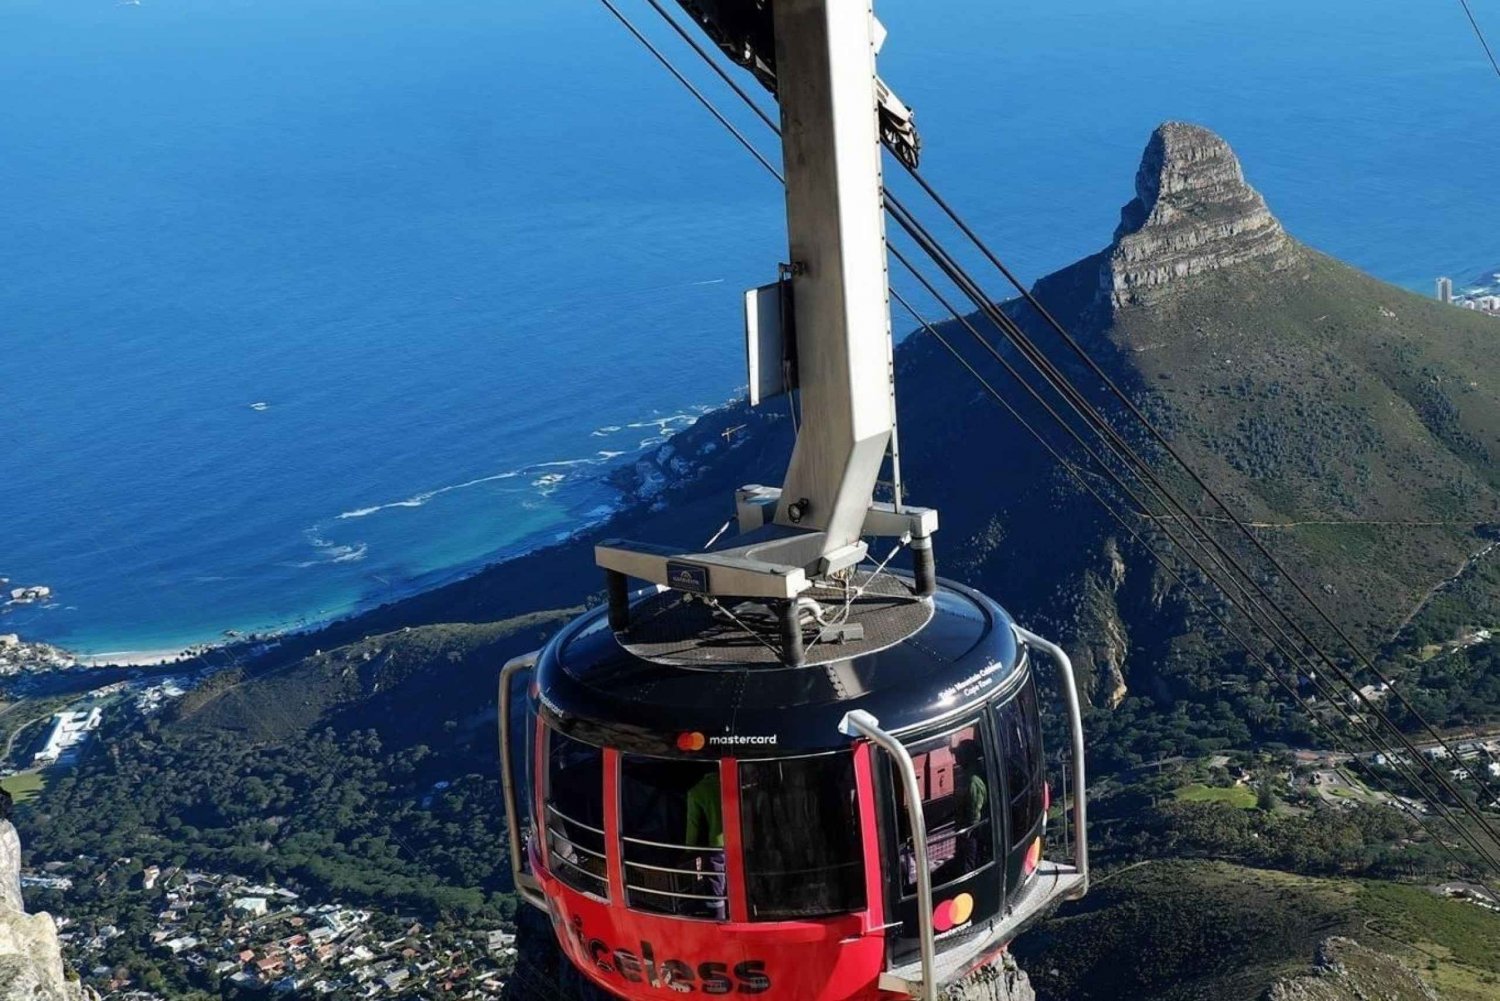 From Cape Town: Table Mountain City tour and Boulders Beach